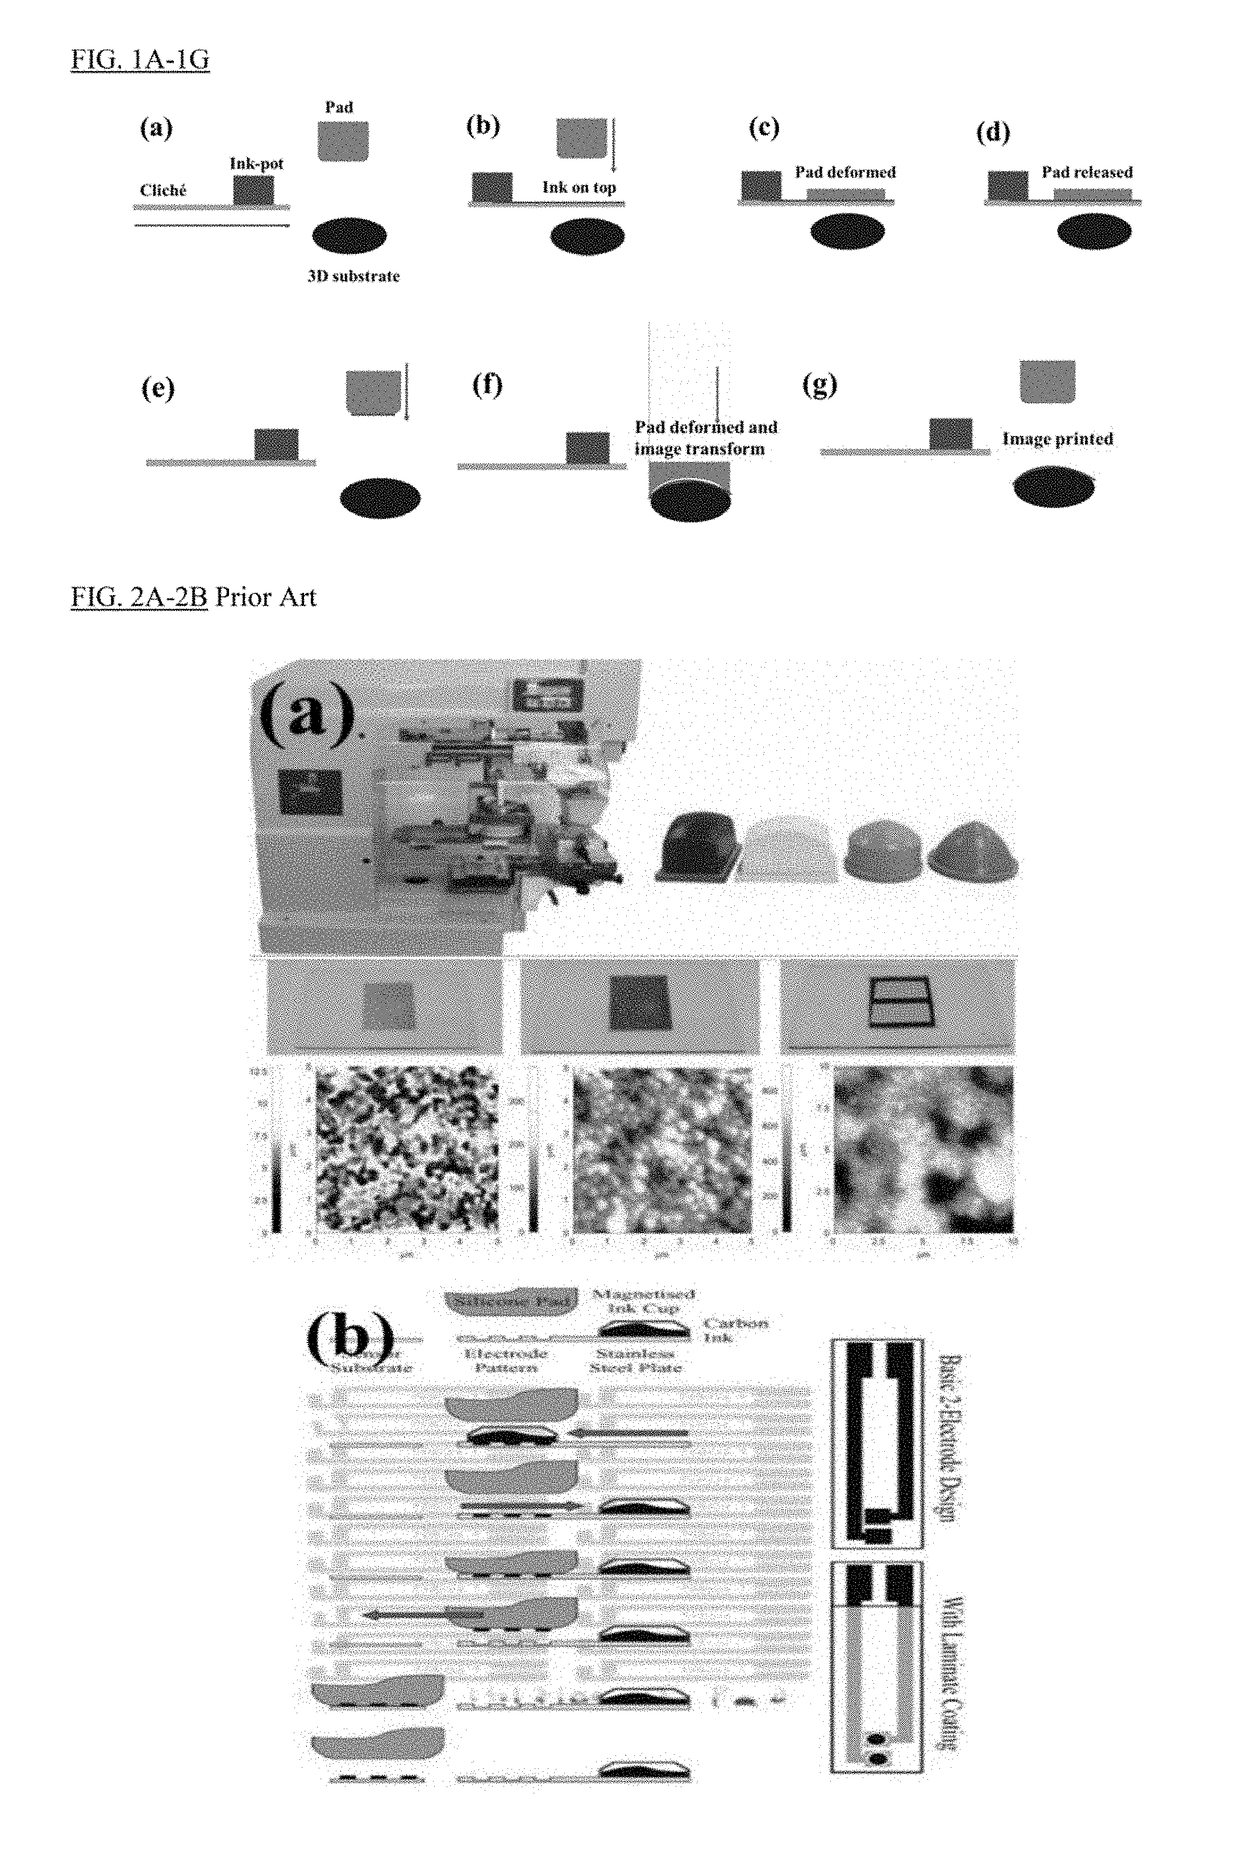 Fabrication of flexible conductive items and batteries using modified inks